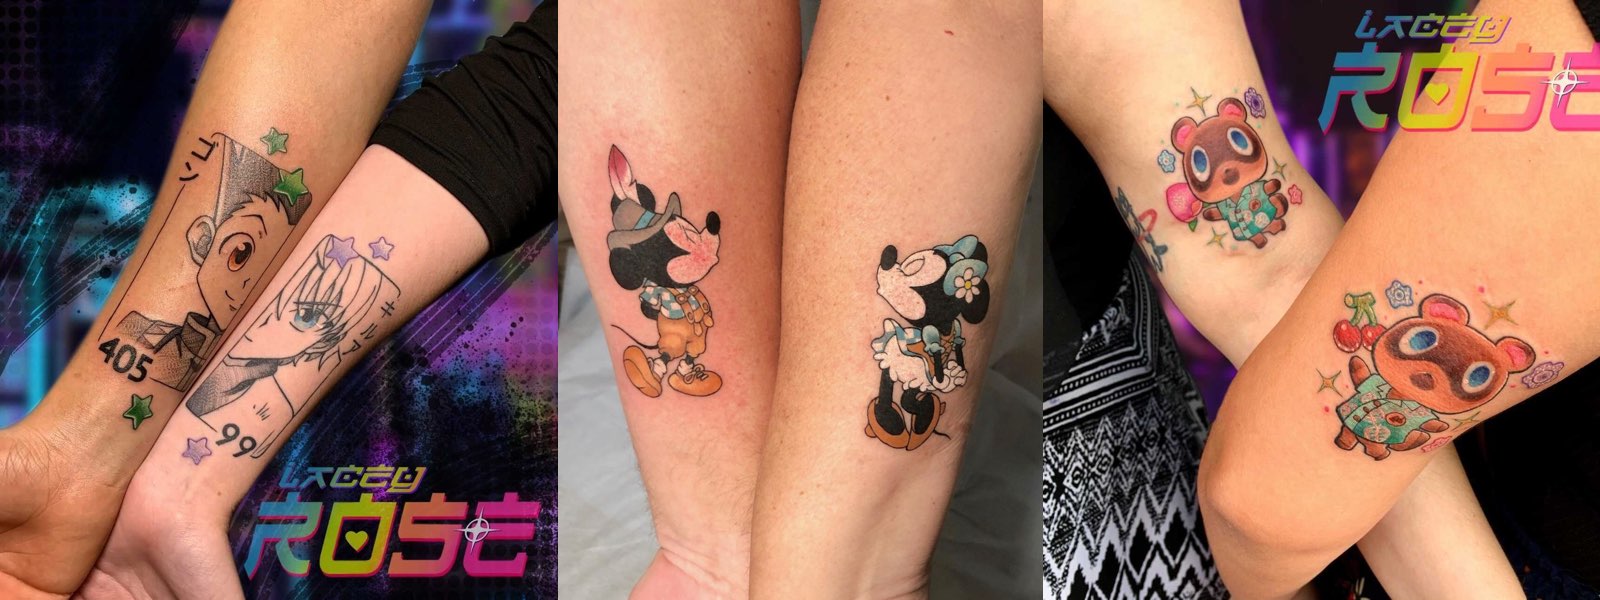 Body Modification Nation  Matching Tattoos  Anime Tattoos By coytattoo